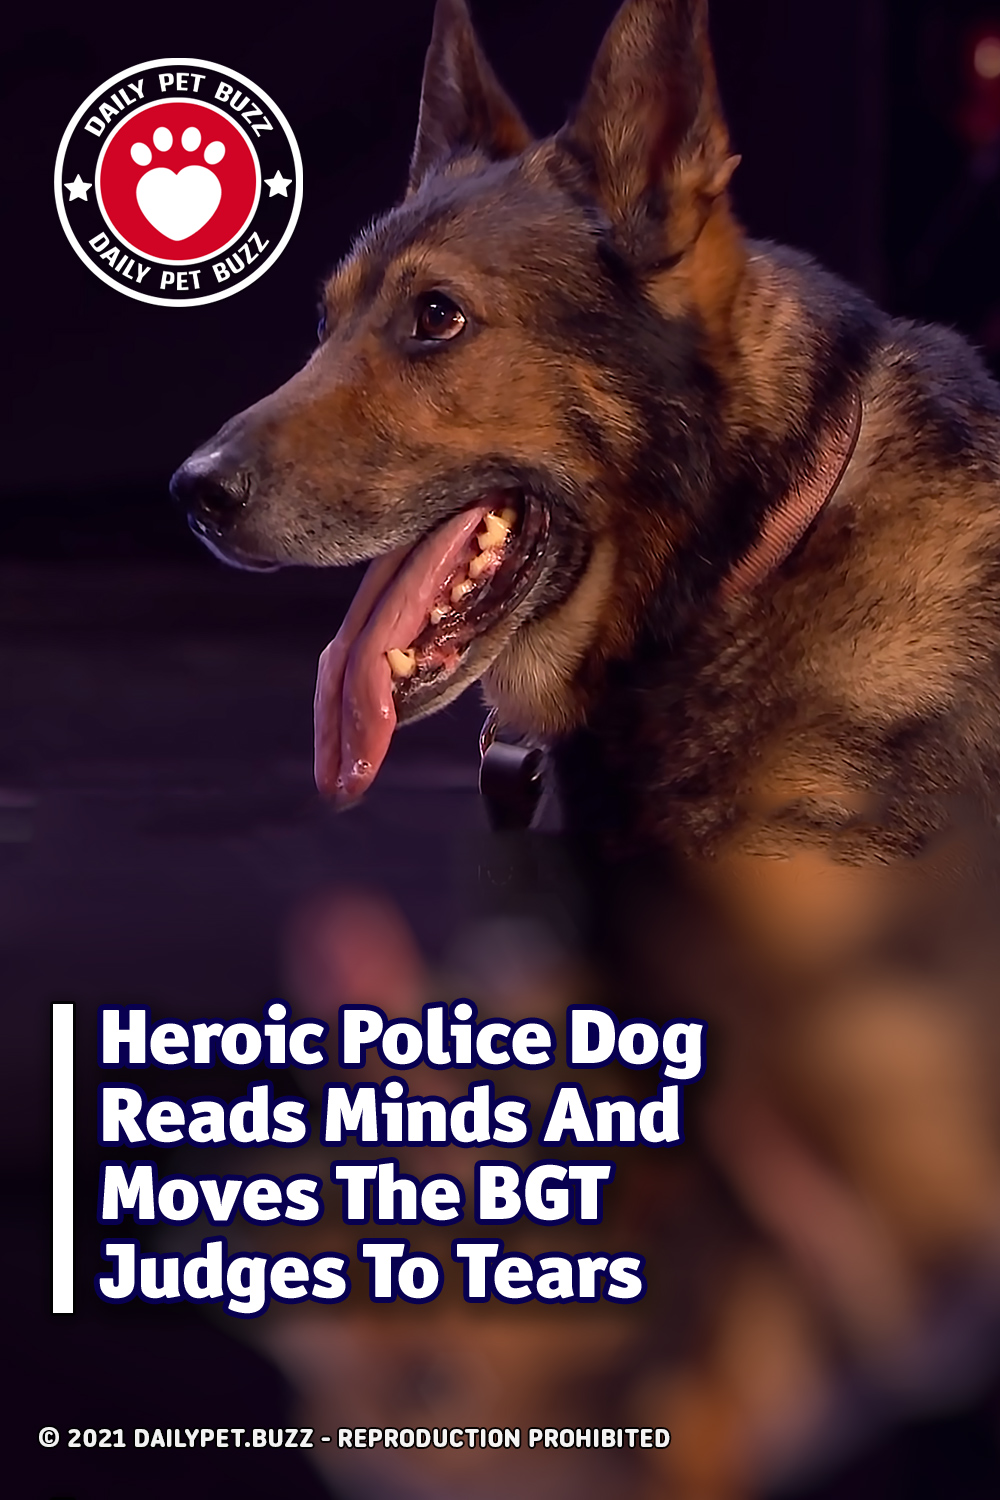 Heroic Police Dog Reads Minds And Moves The BGT Judges To Tears